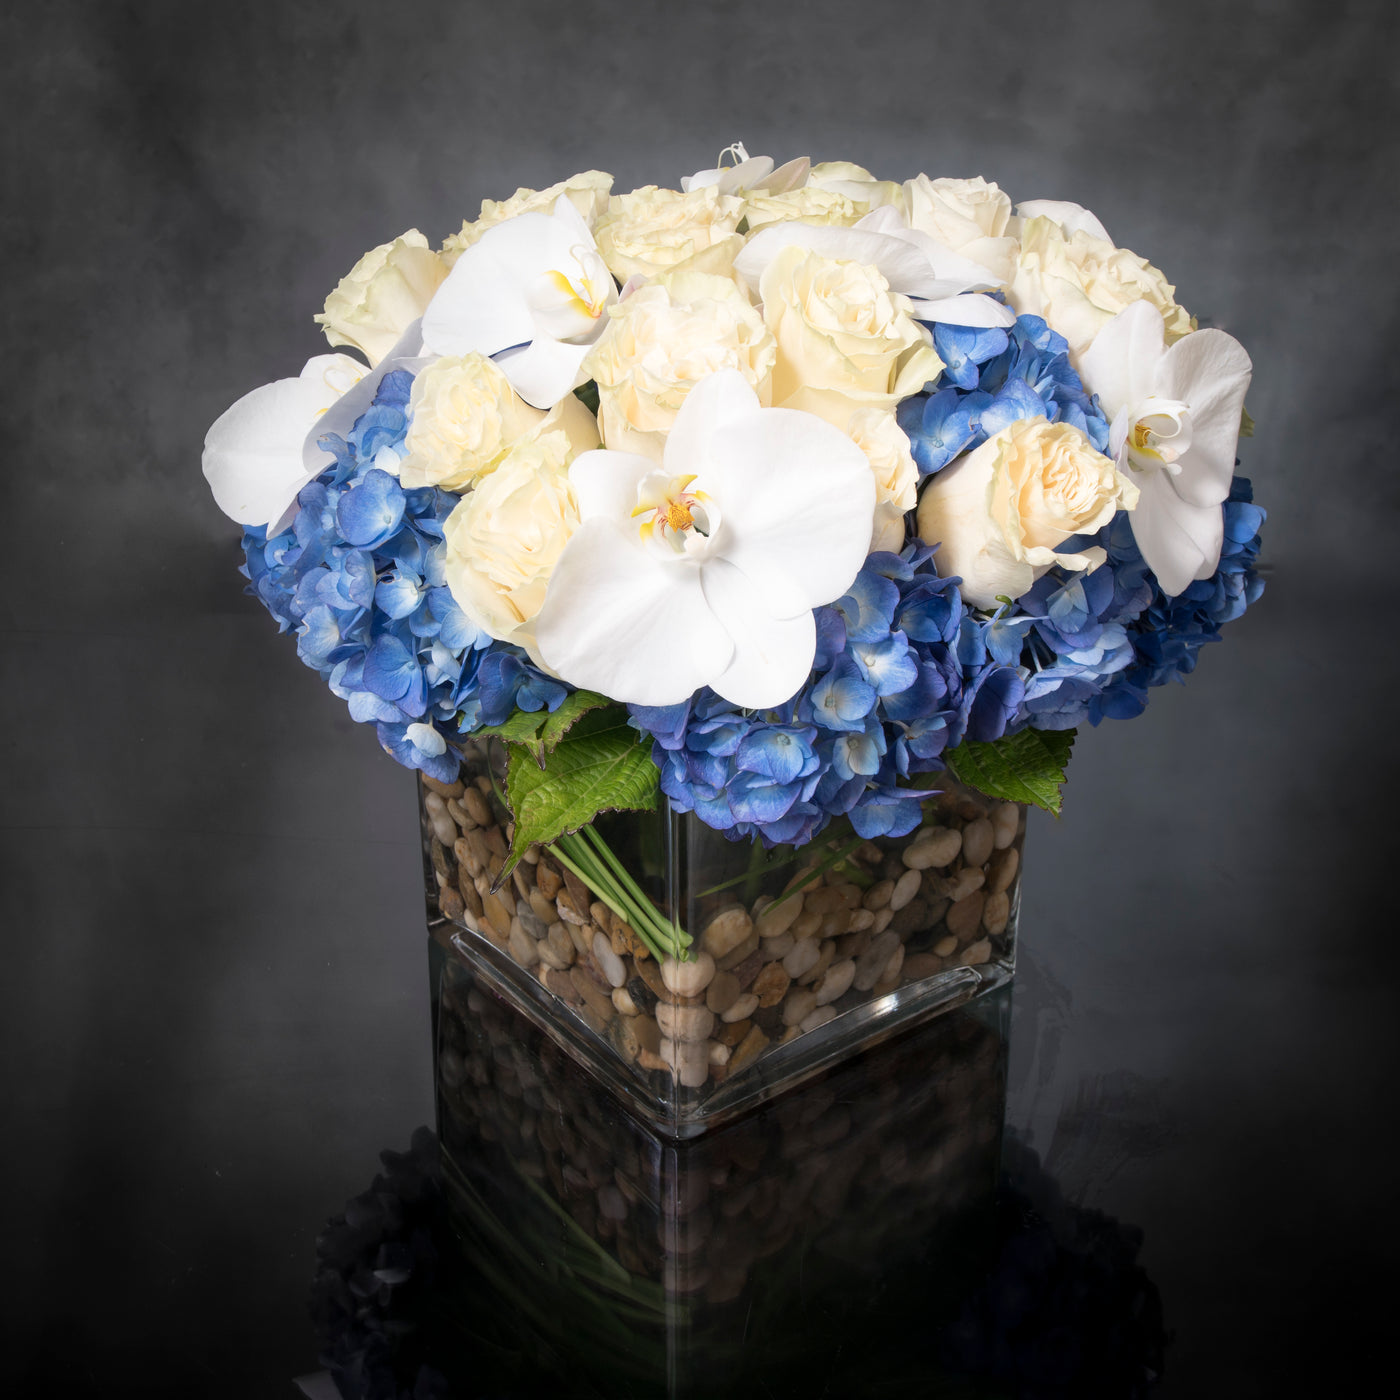 Beverly Hills Florist presents same day delivery for our "Heart of the Sea". light blue Hydrangeas, white Phalaenopsis Orchids, and beautiful white Roses. It’s a gift that celebrates the carefree spirit of summer, while surprising the people you care about most. Thank you flowers, Get well soon flowers, thinking of you flowers, thank you flowers! 